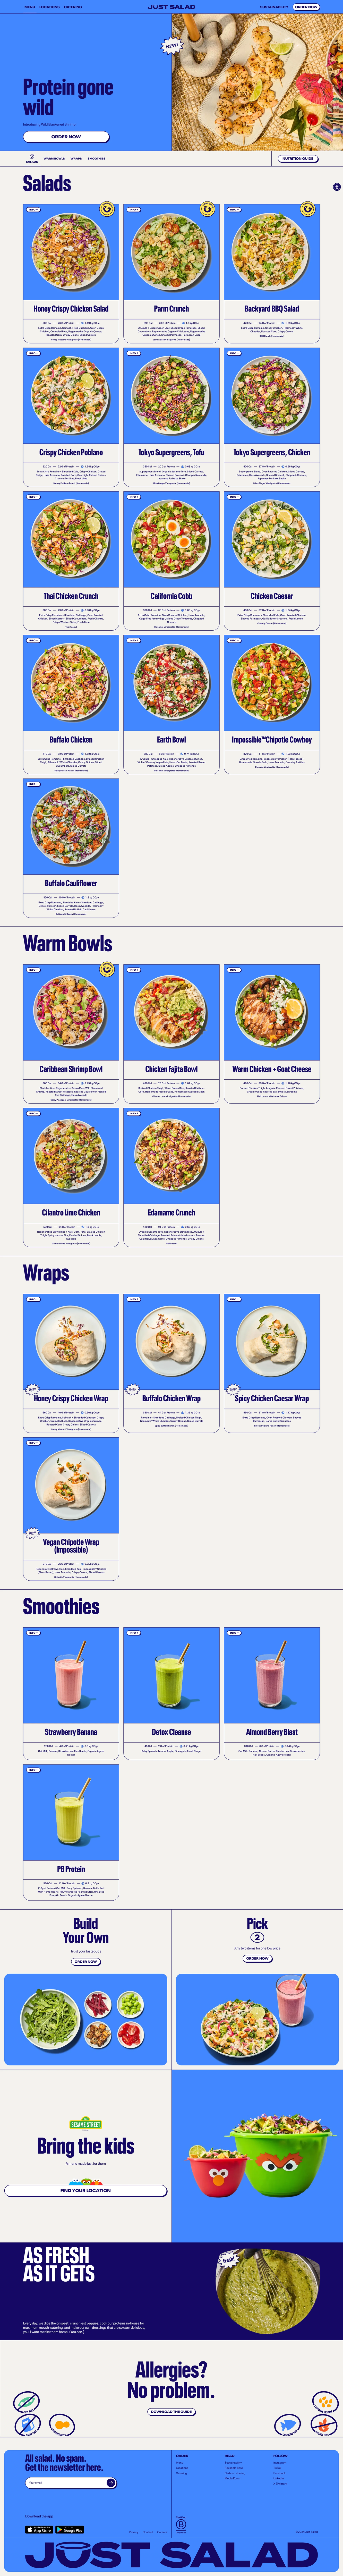 Just Salad Landing Page Example: Give in to hunger without giving up on what really matters. From reusable bowls to our plant-centric menu, we're doing business differently. Find your craving at Just Salad.